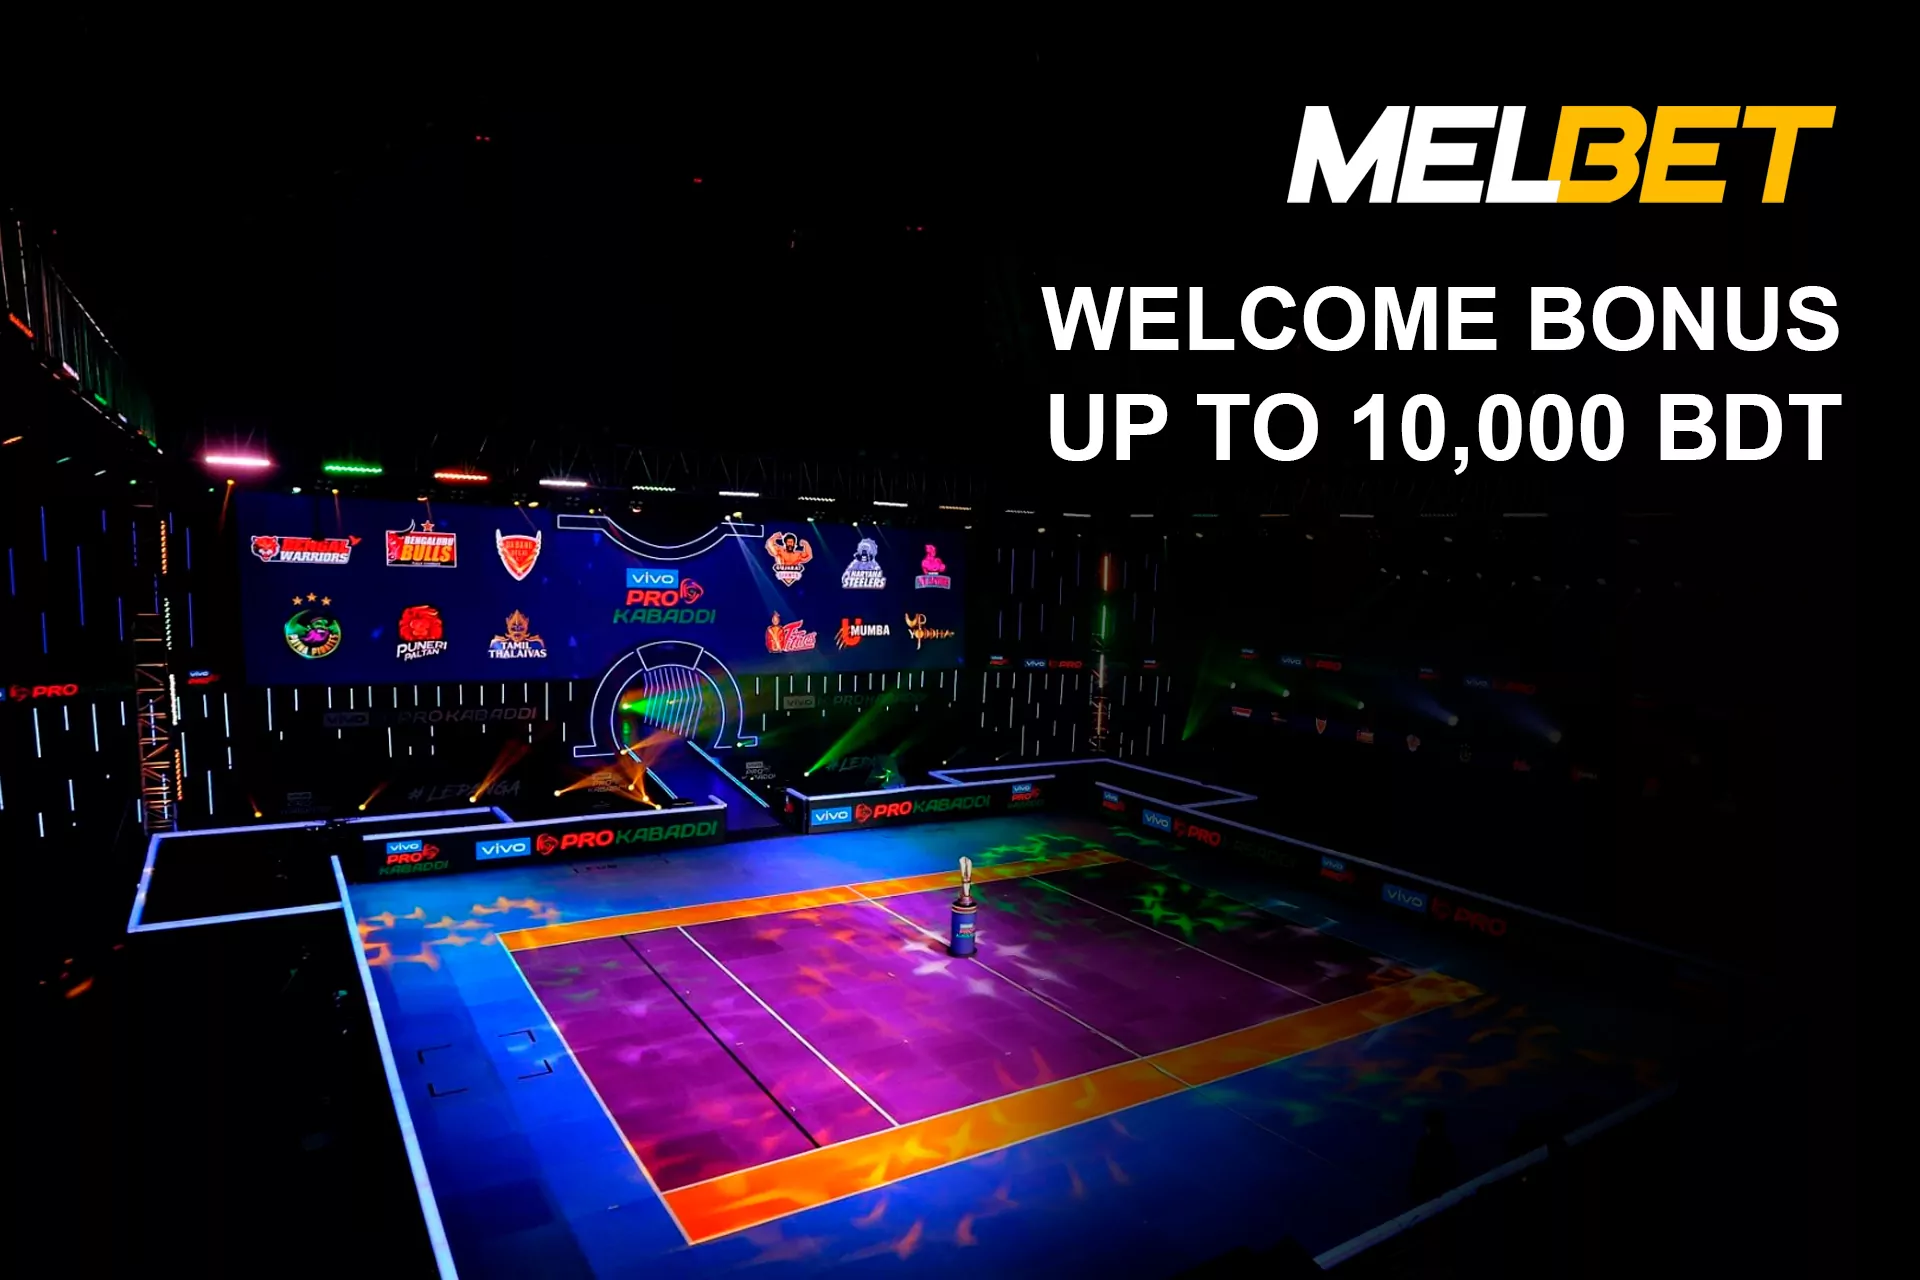 New users can get a welcome betting bonus of up to 10,000 BDT.